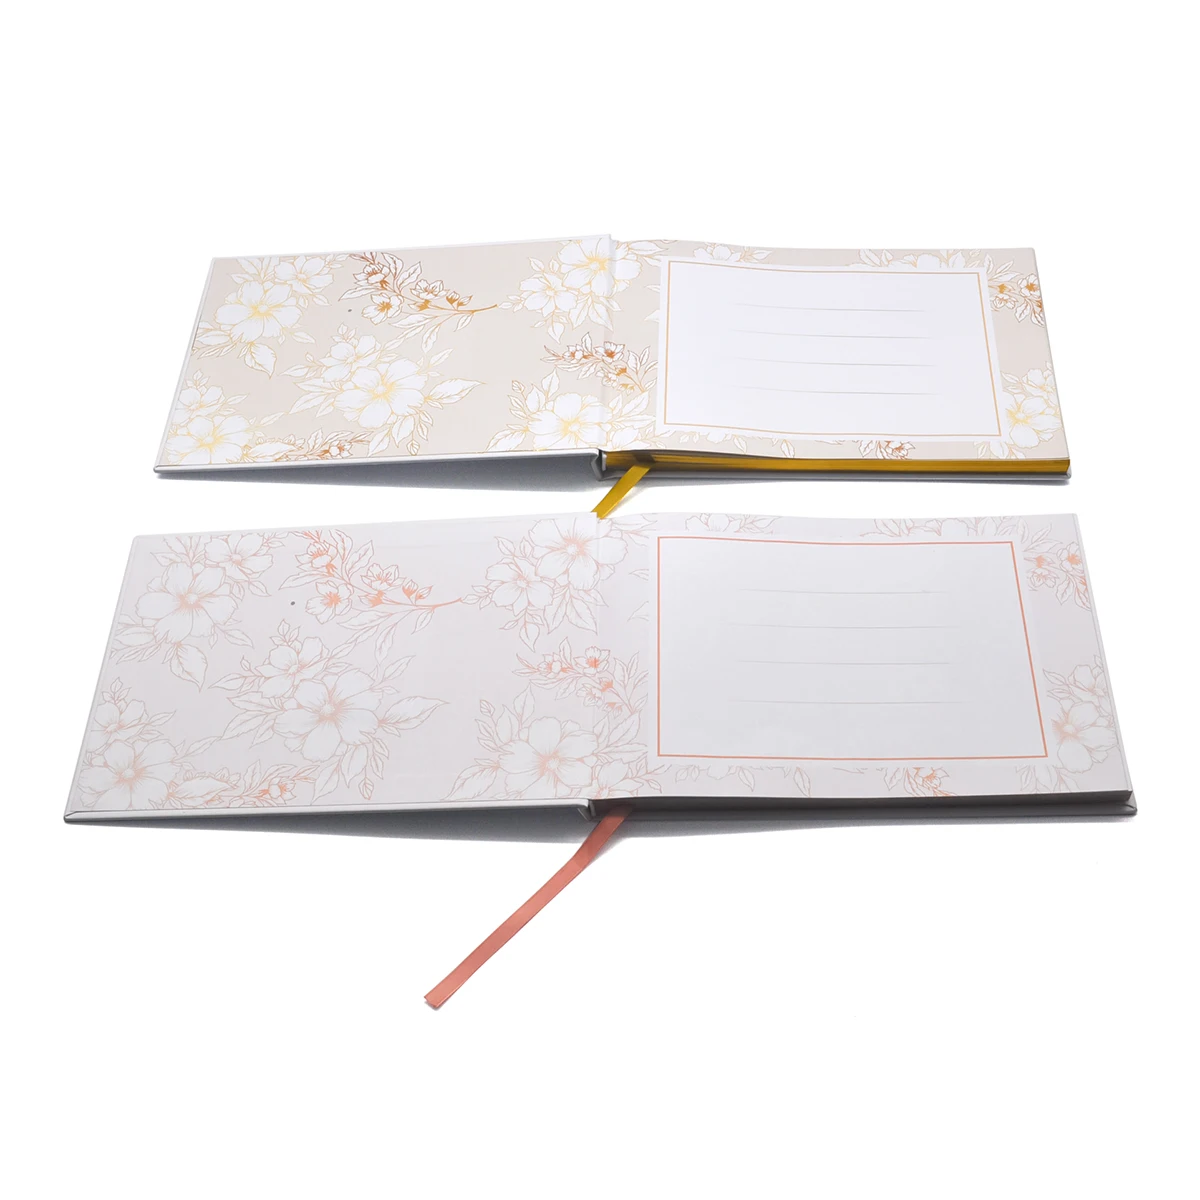 2021 2022 wholesales good quality wedding memory Signature white vow baby shower guest books in presentation box set with pen